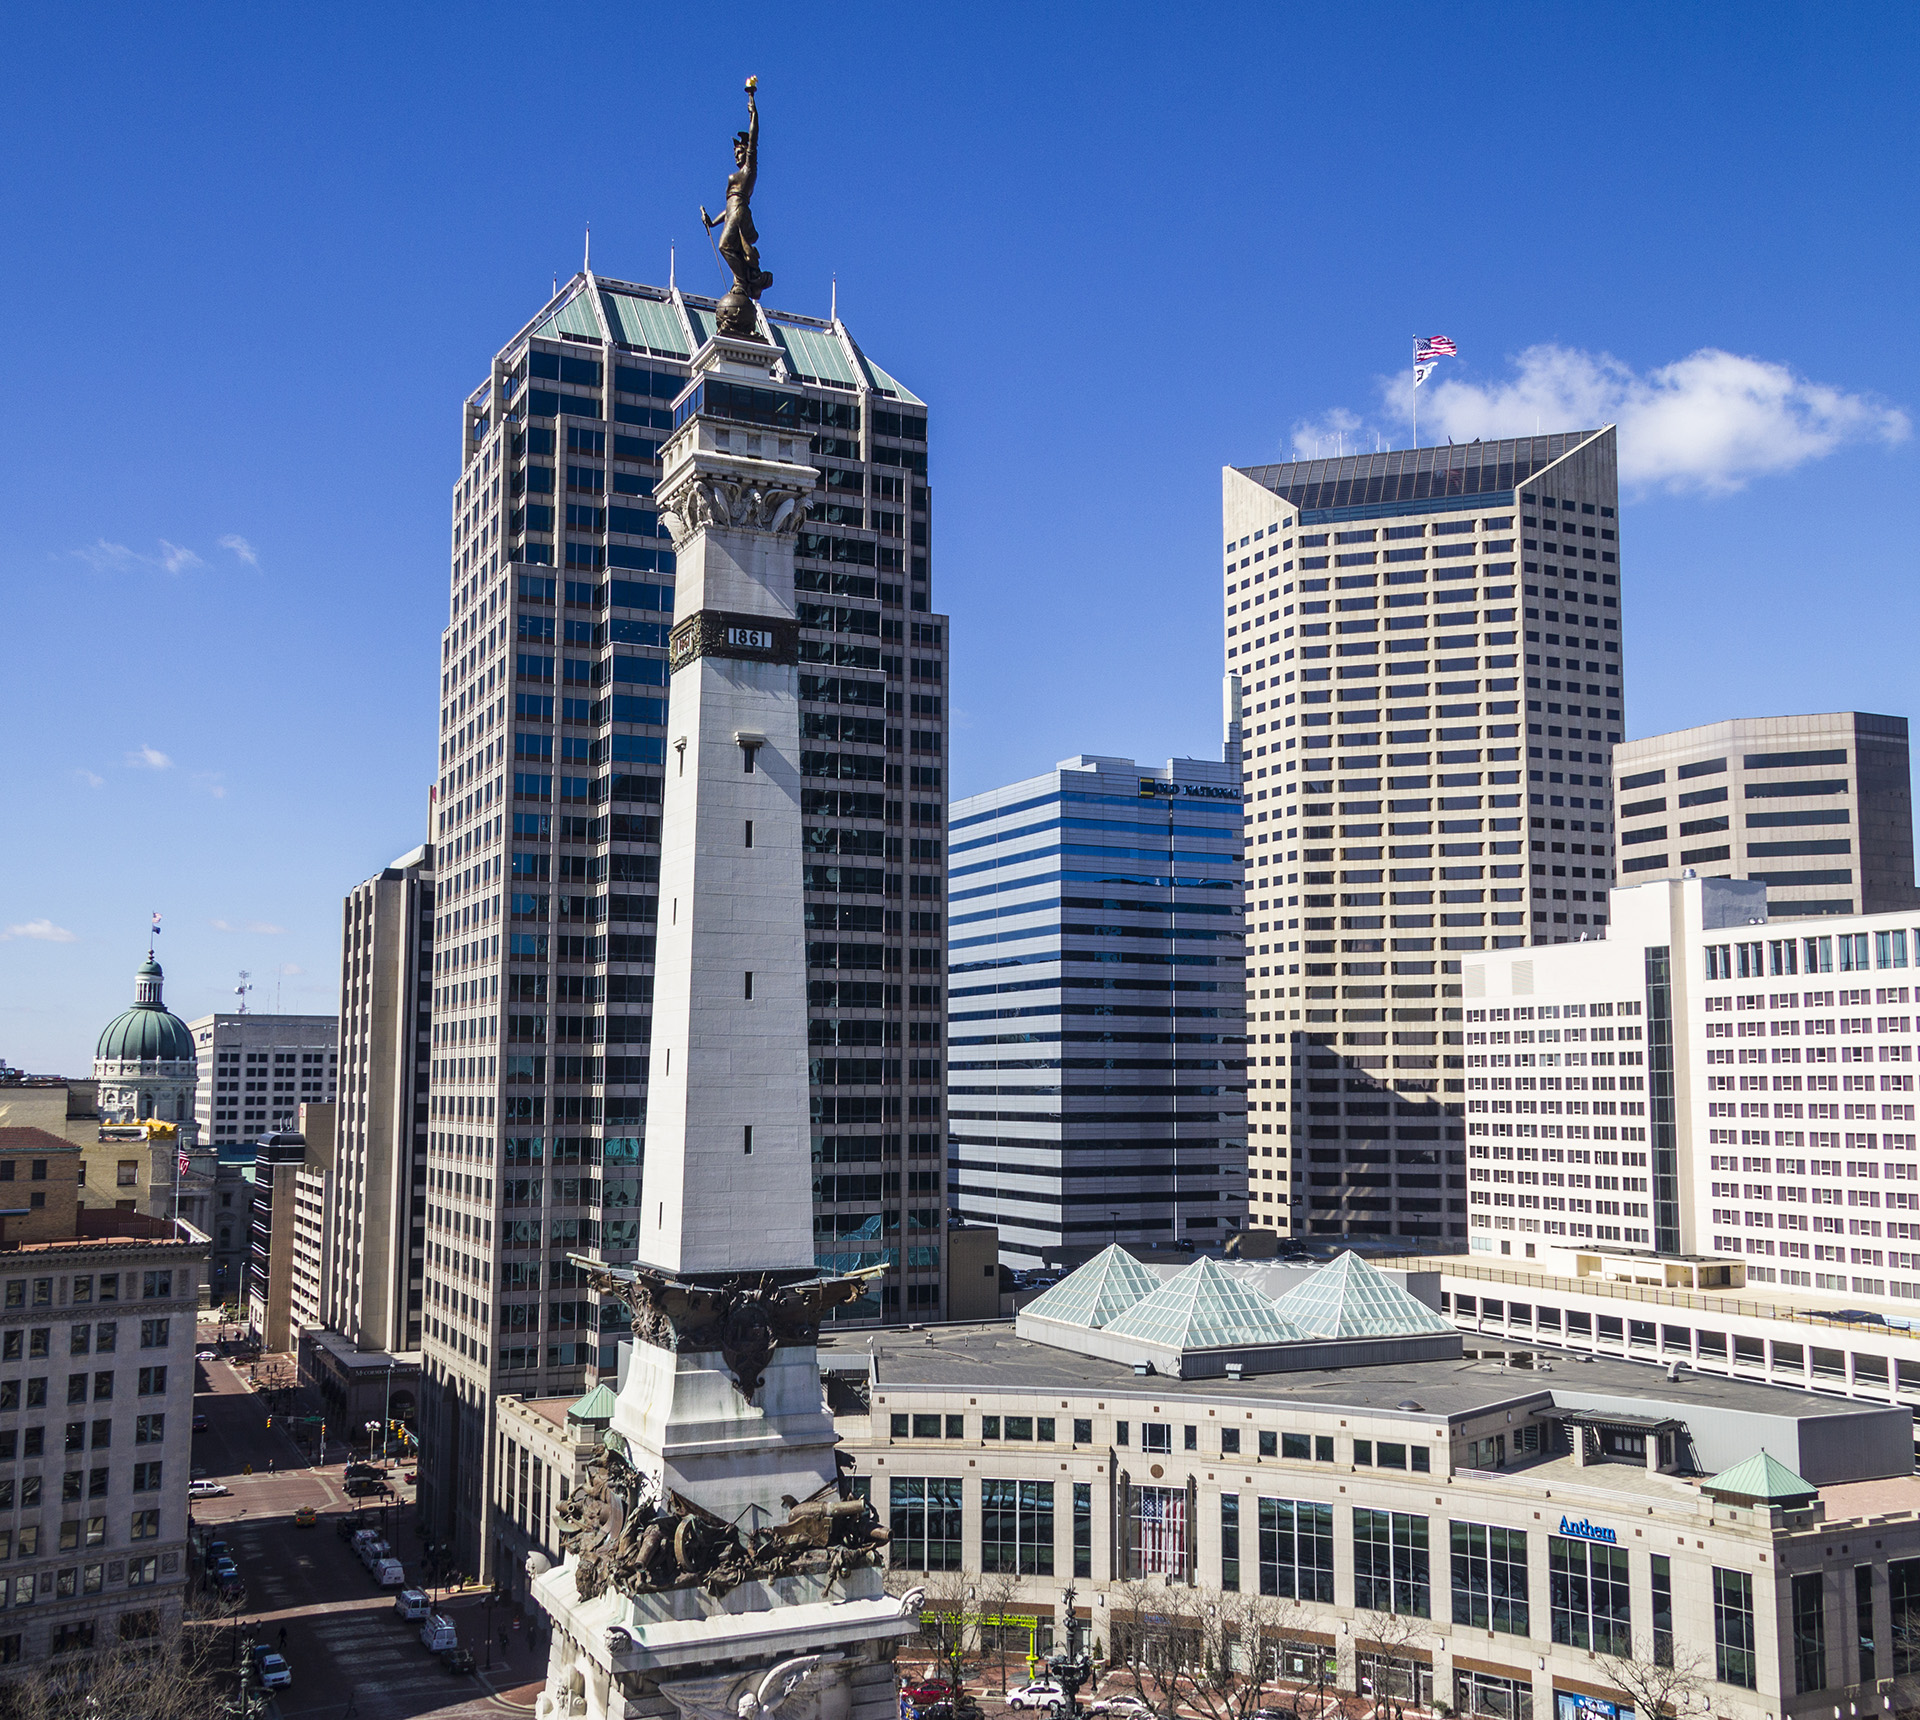 A view of downtown Indianapolis with a blue sky